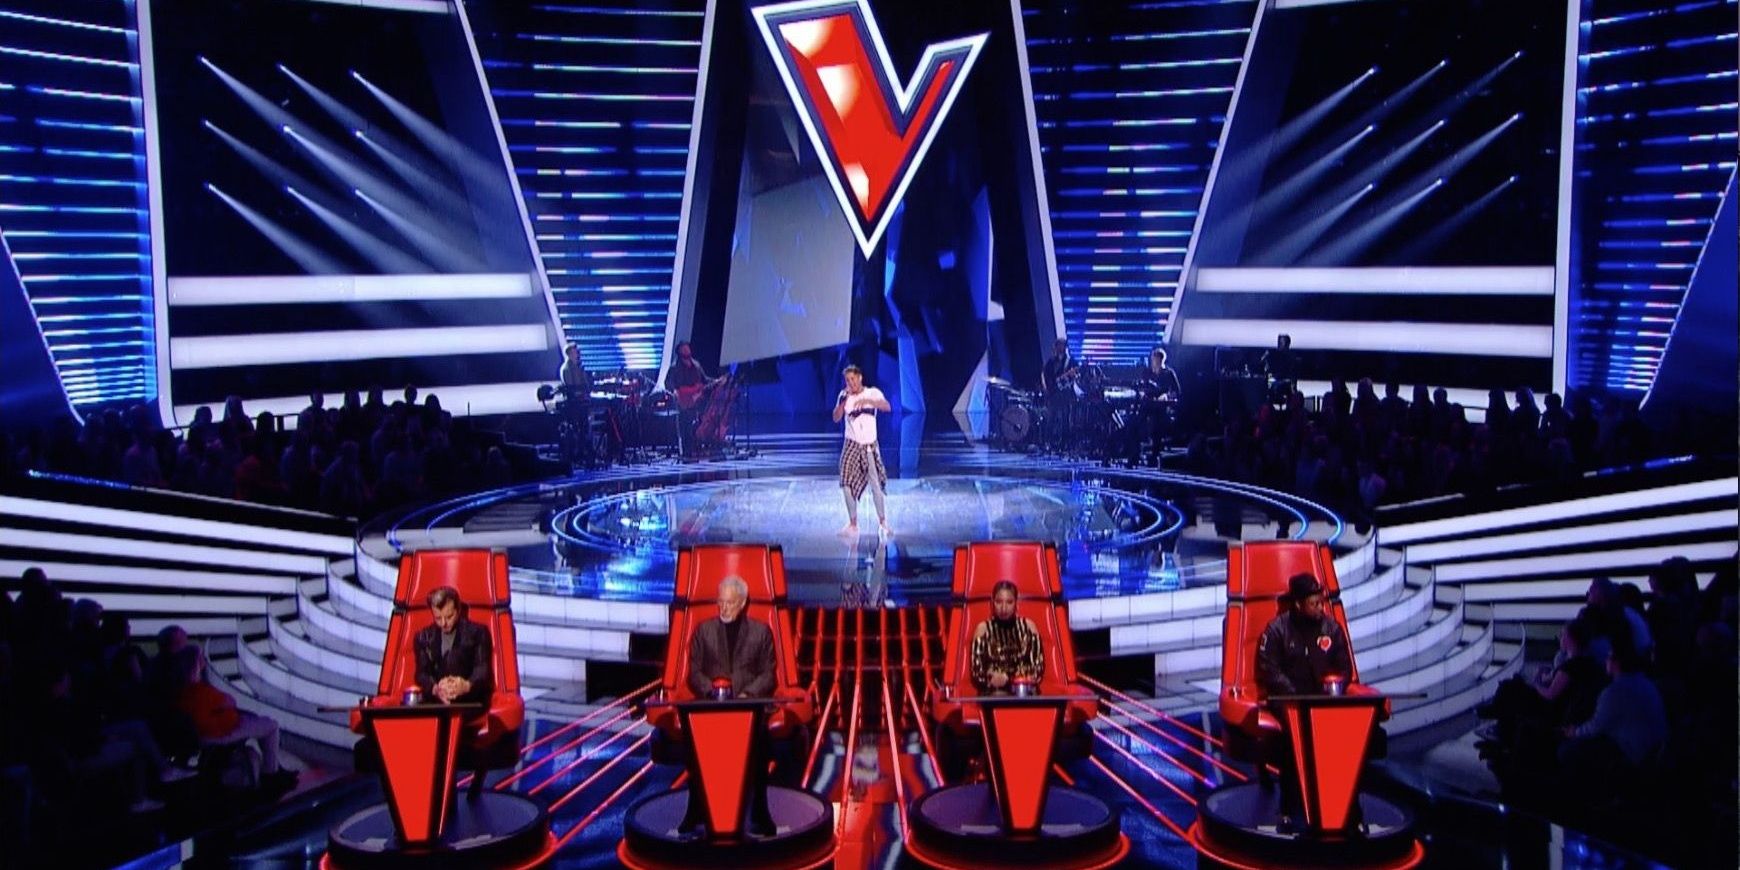 Charlie Drew performing his blind audition on the UK version of The Voice